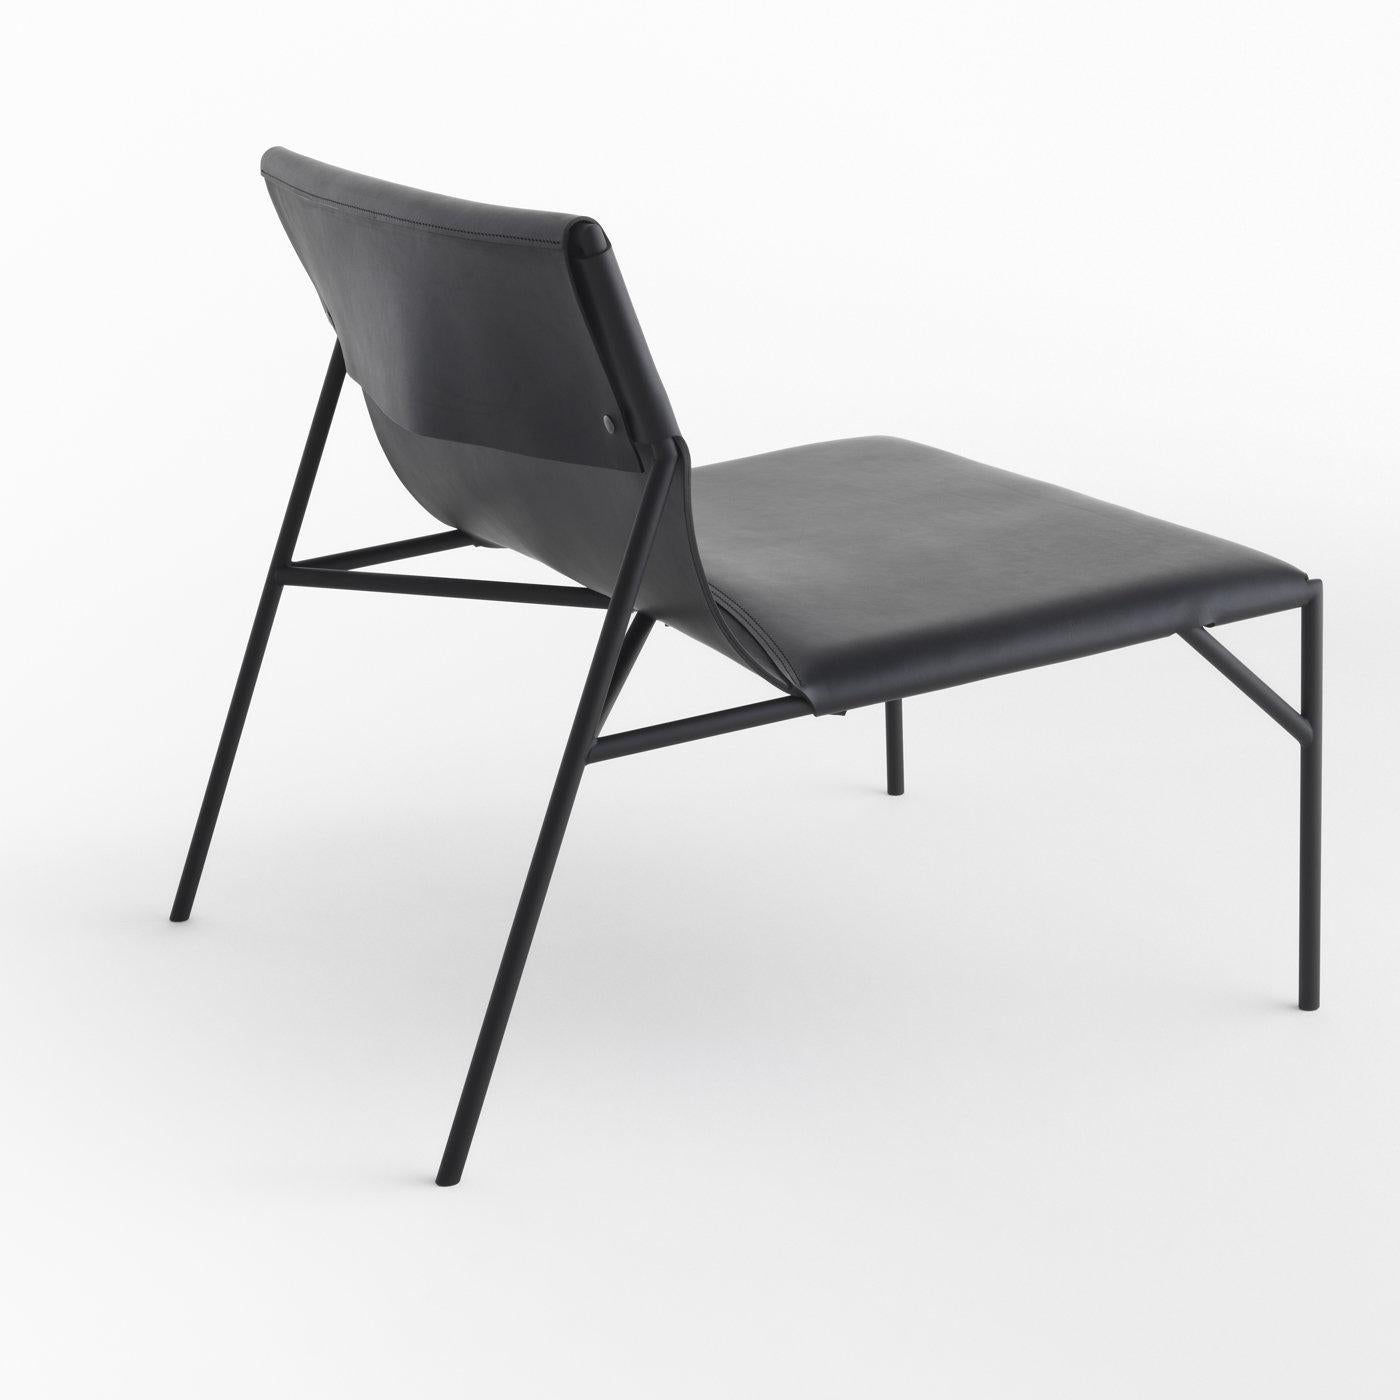 Delicately resting on a robust black-finished metal structure, this lounge chair designed by Marc Thorpe has an elegant and essential silhouette. The extended seat (40 cm height) is upholstered in black leather, and features a slanted backrest that